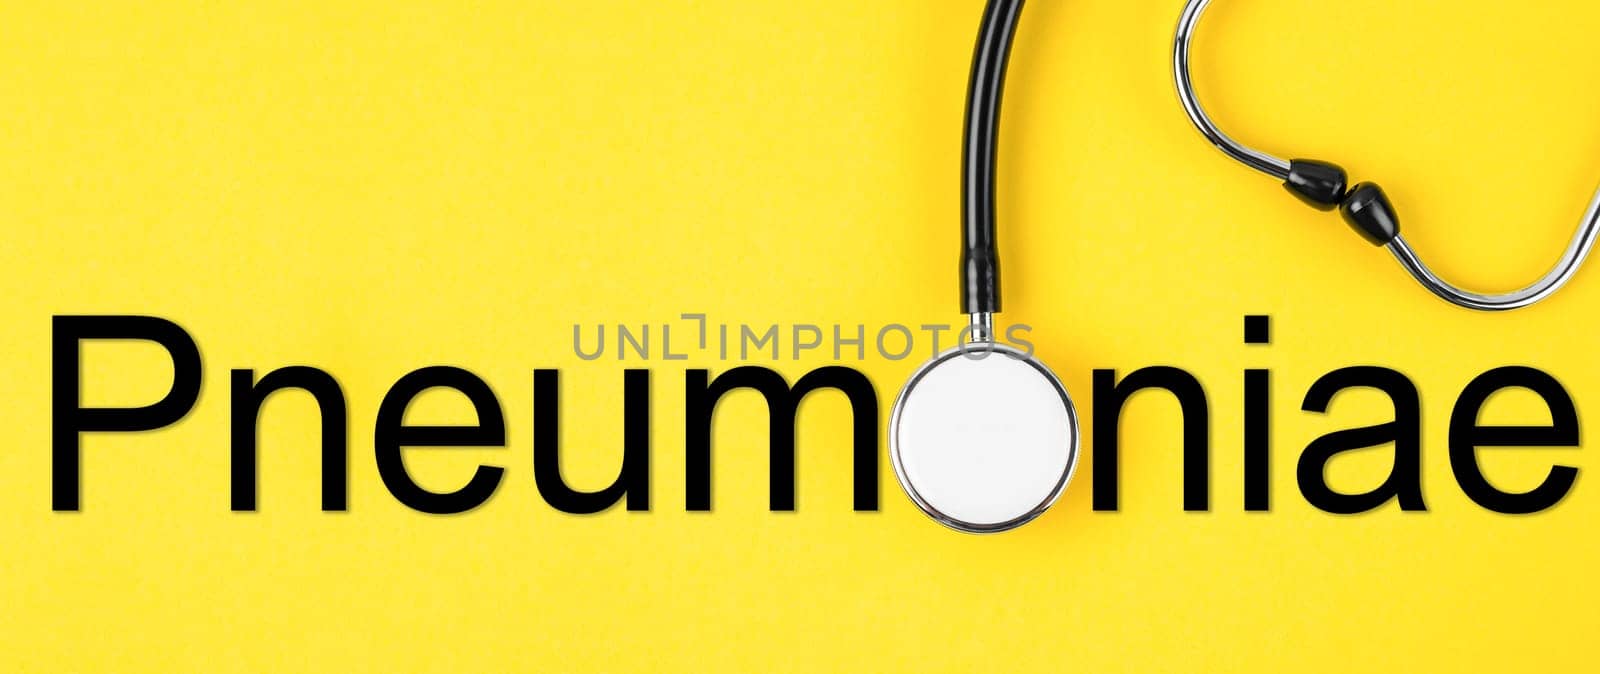 The Pneumonia text and medical stethoscope on yellow background. Medcial and healthcare concepts. by Gamjai